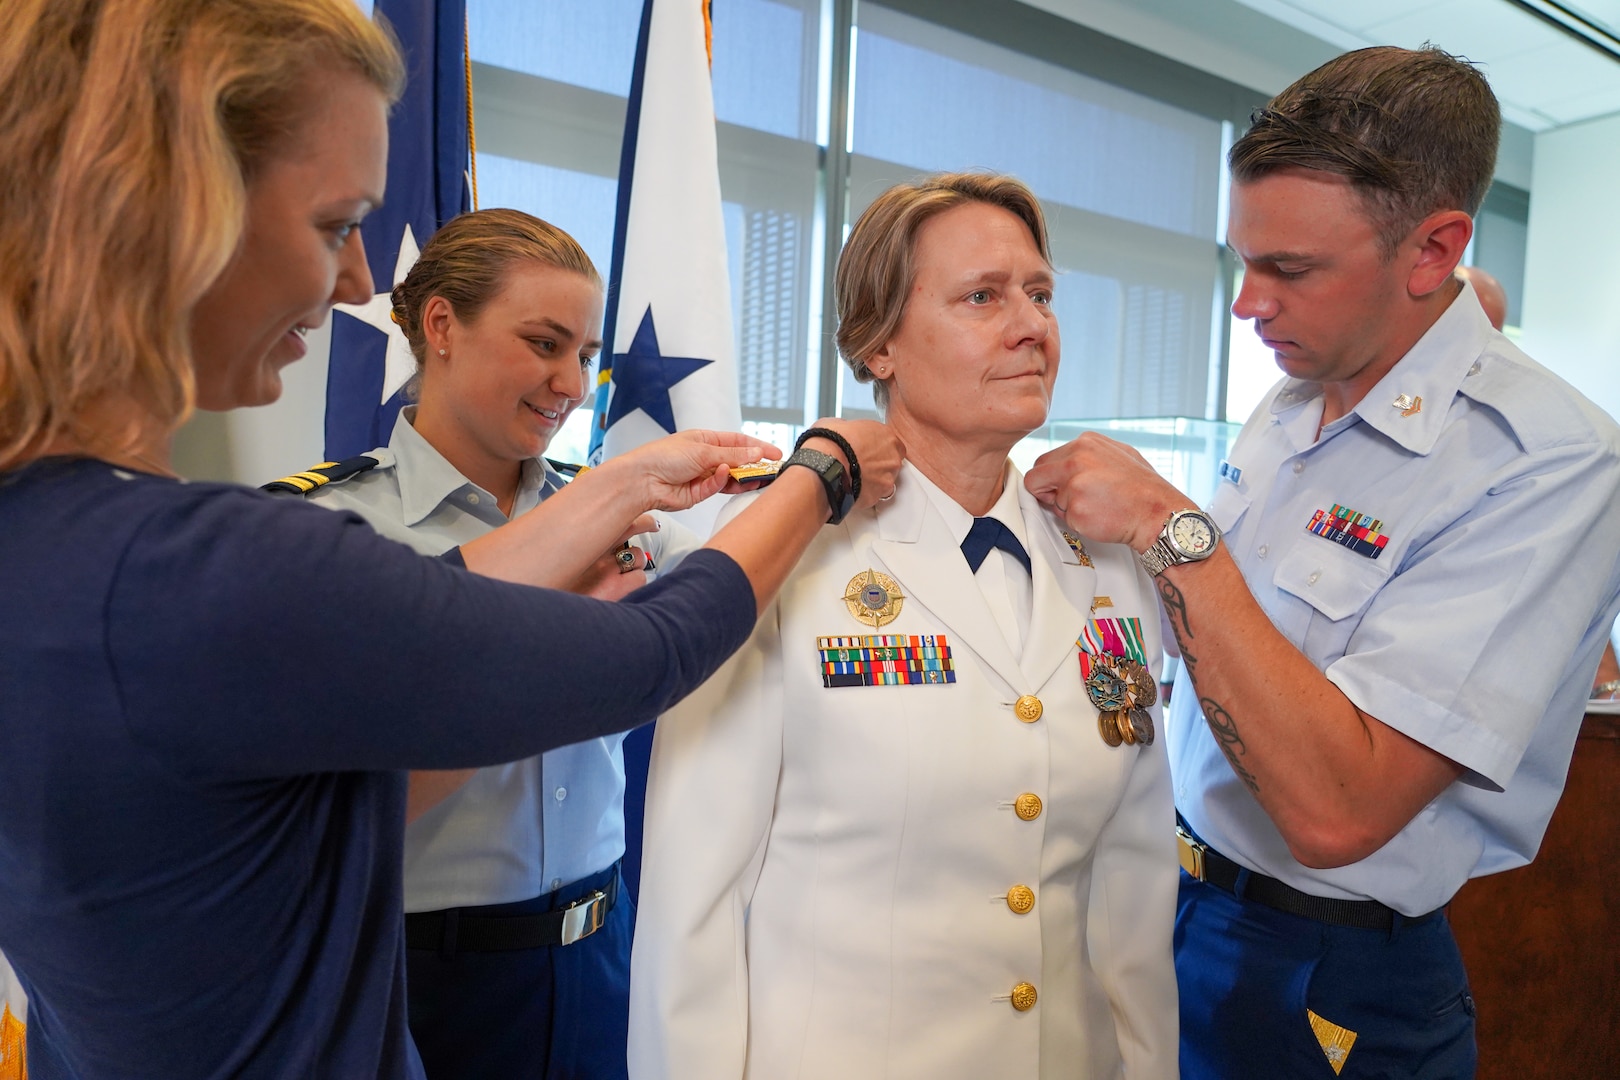 Three people in military dress uniform add rank pins onto a female military officer.